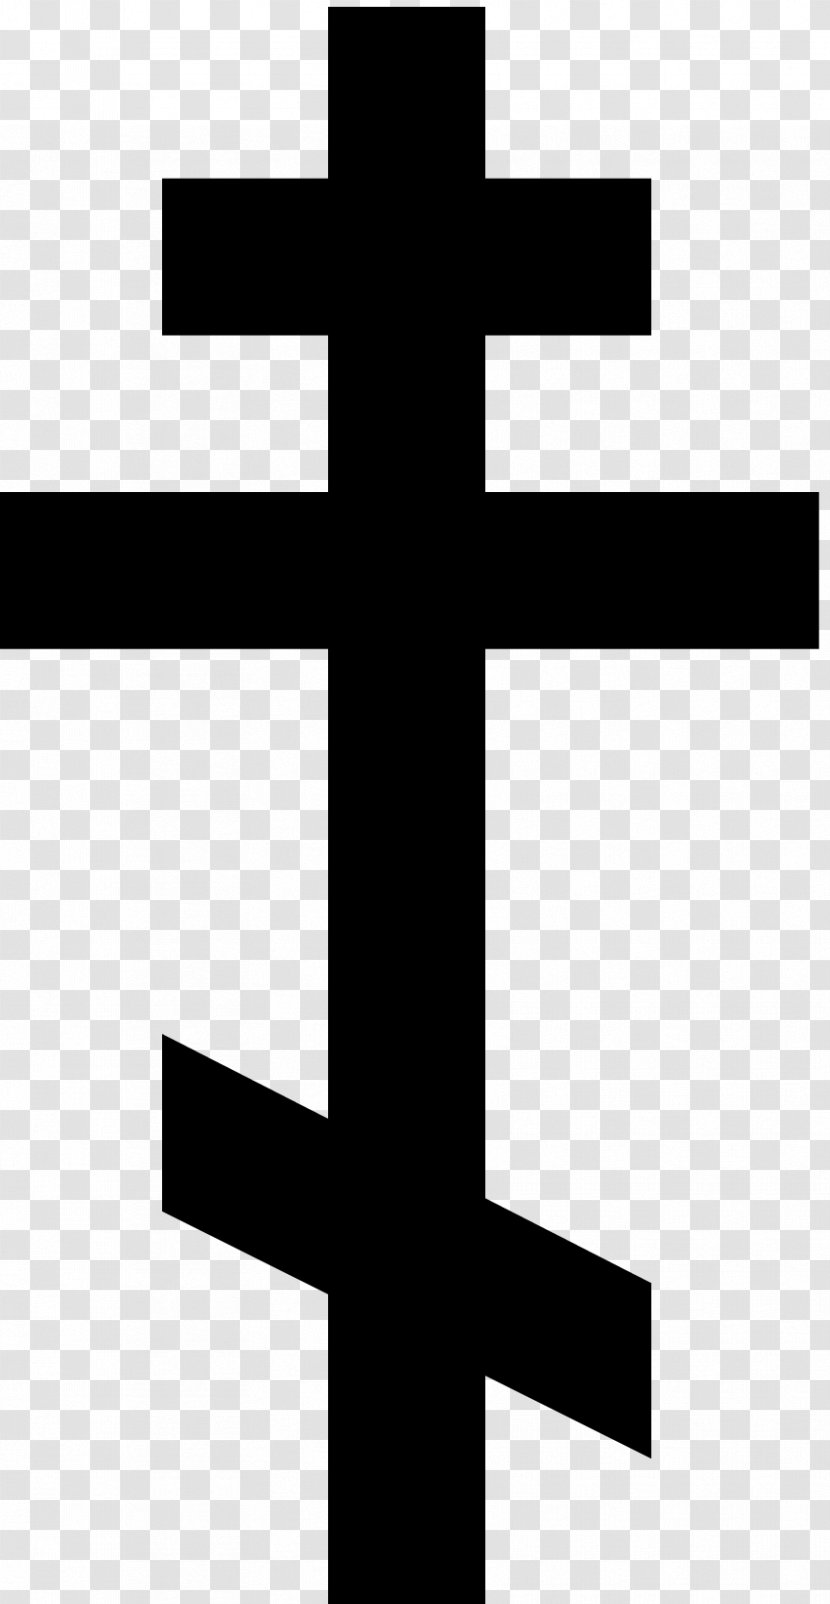 Russian Orthodox Church Cross Eastern Christian Patriarchal - Symmetry Transparent PNG